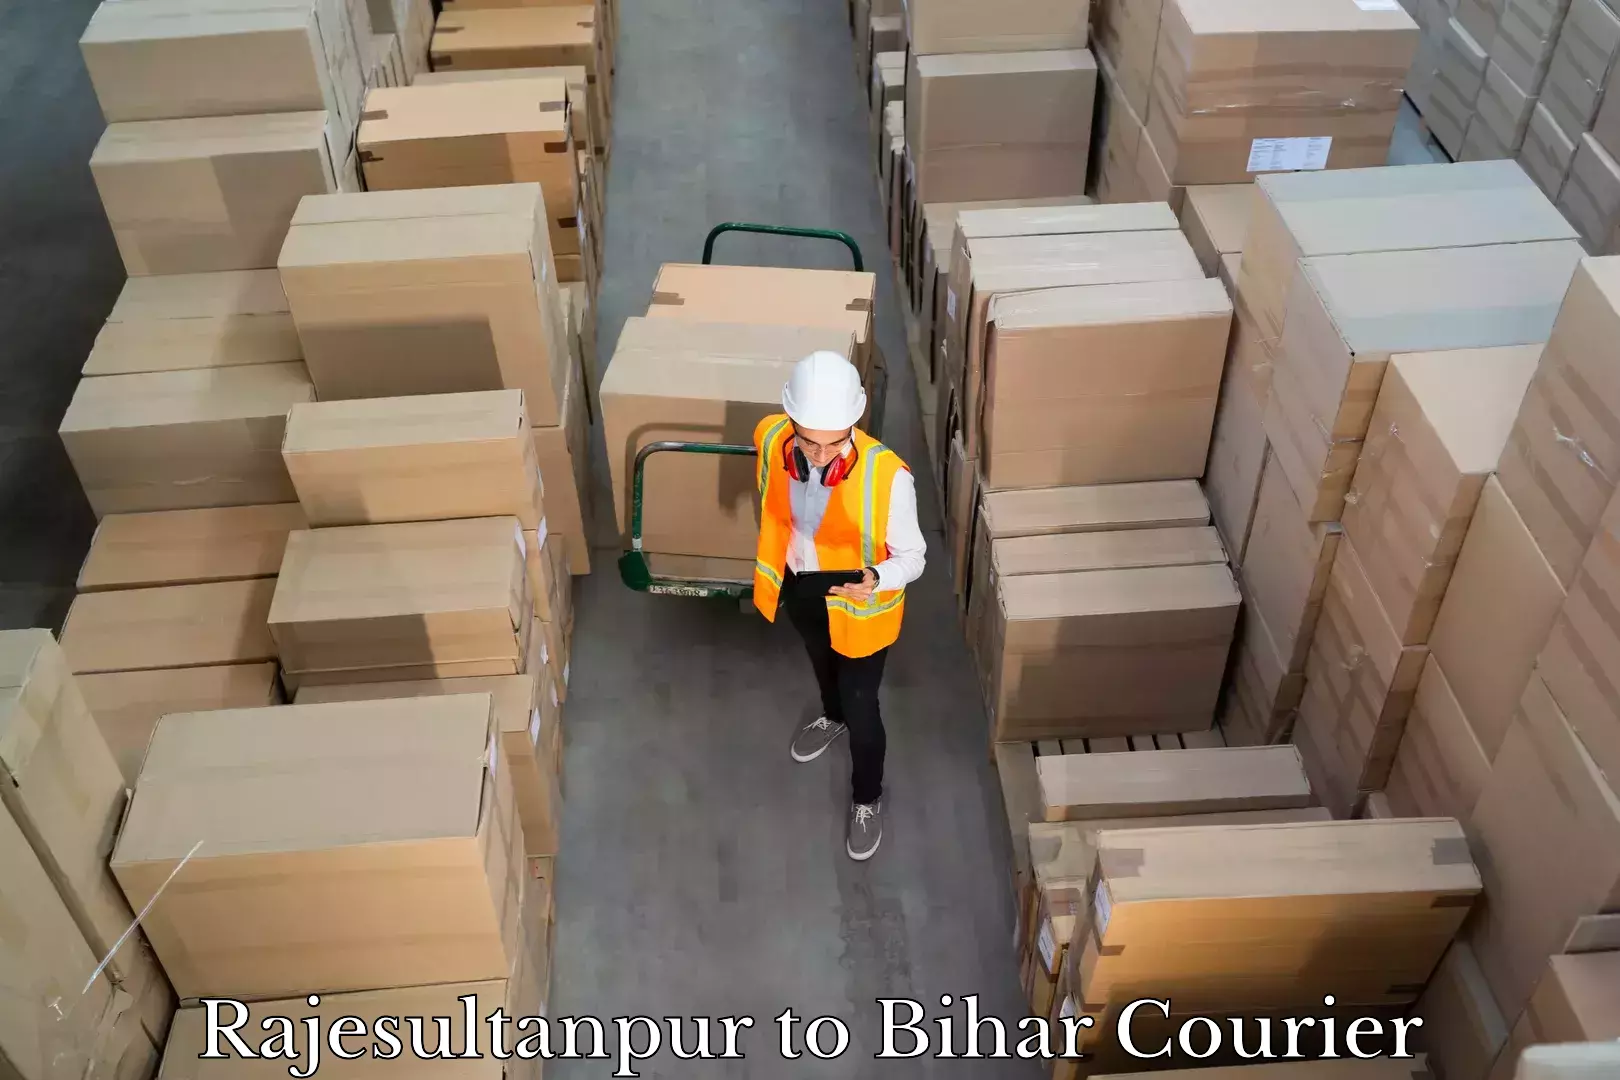 Baggage shipping experience Rajesultanpur to Buxar